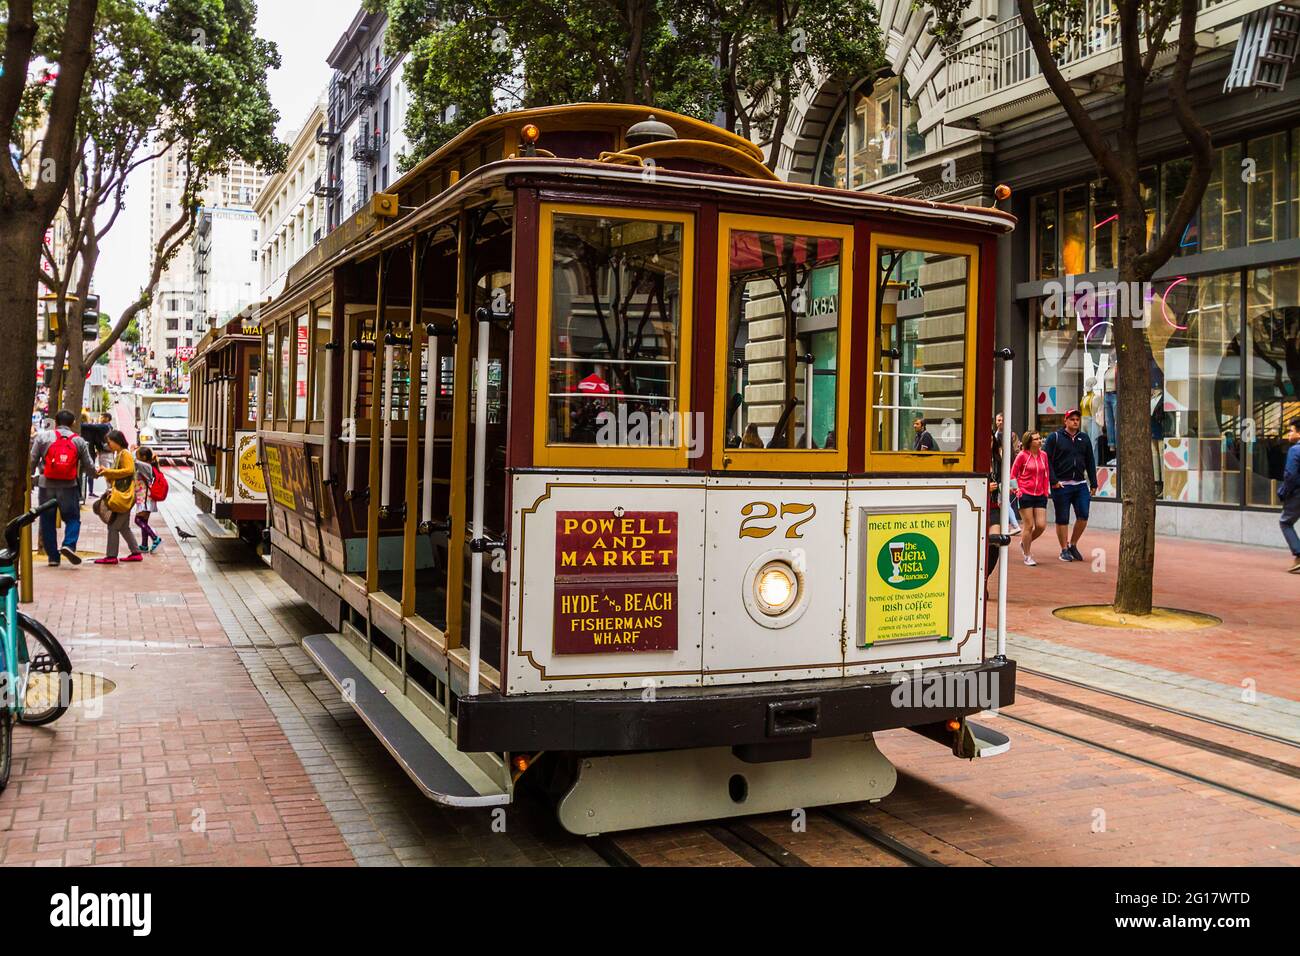 Close up of the Powell and Market cable car Stock Photo